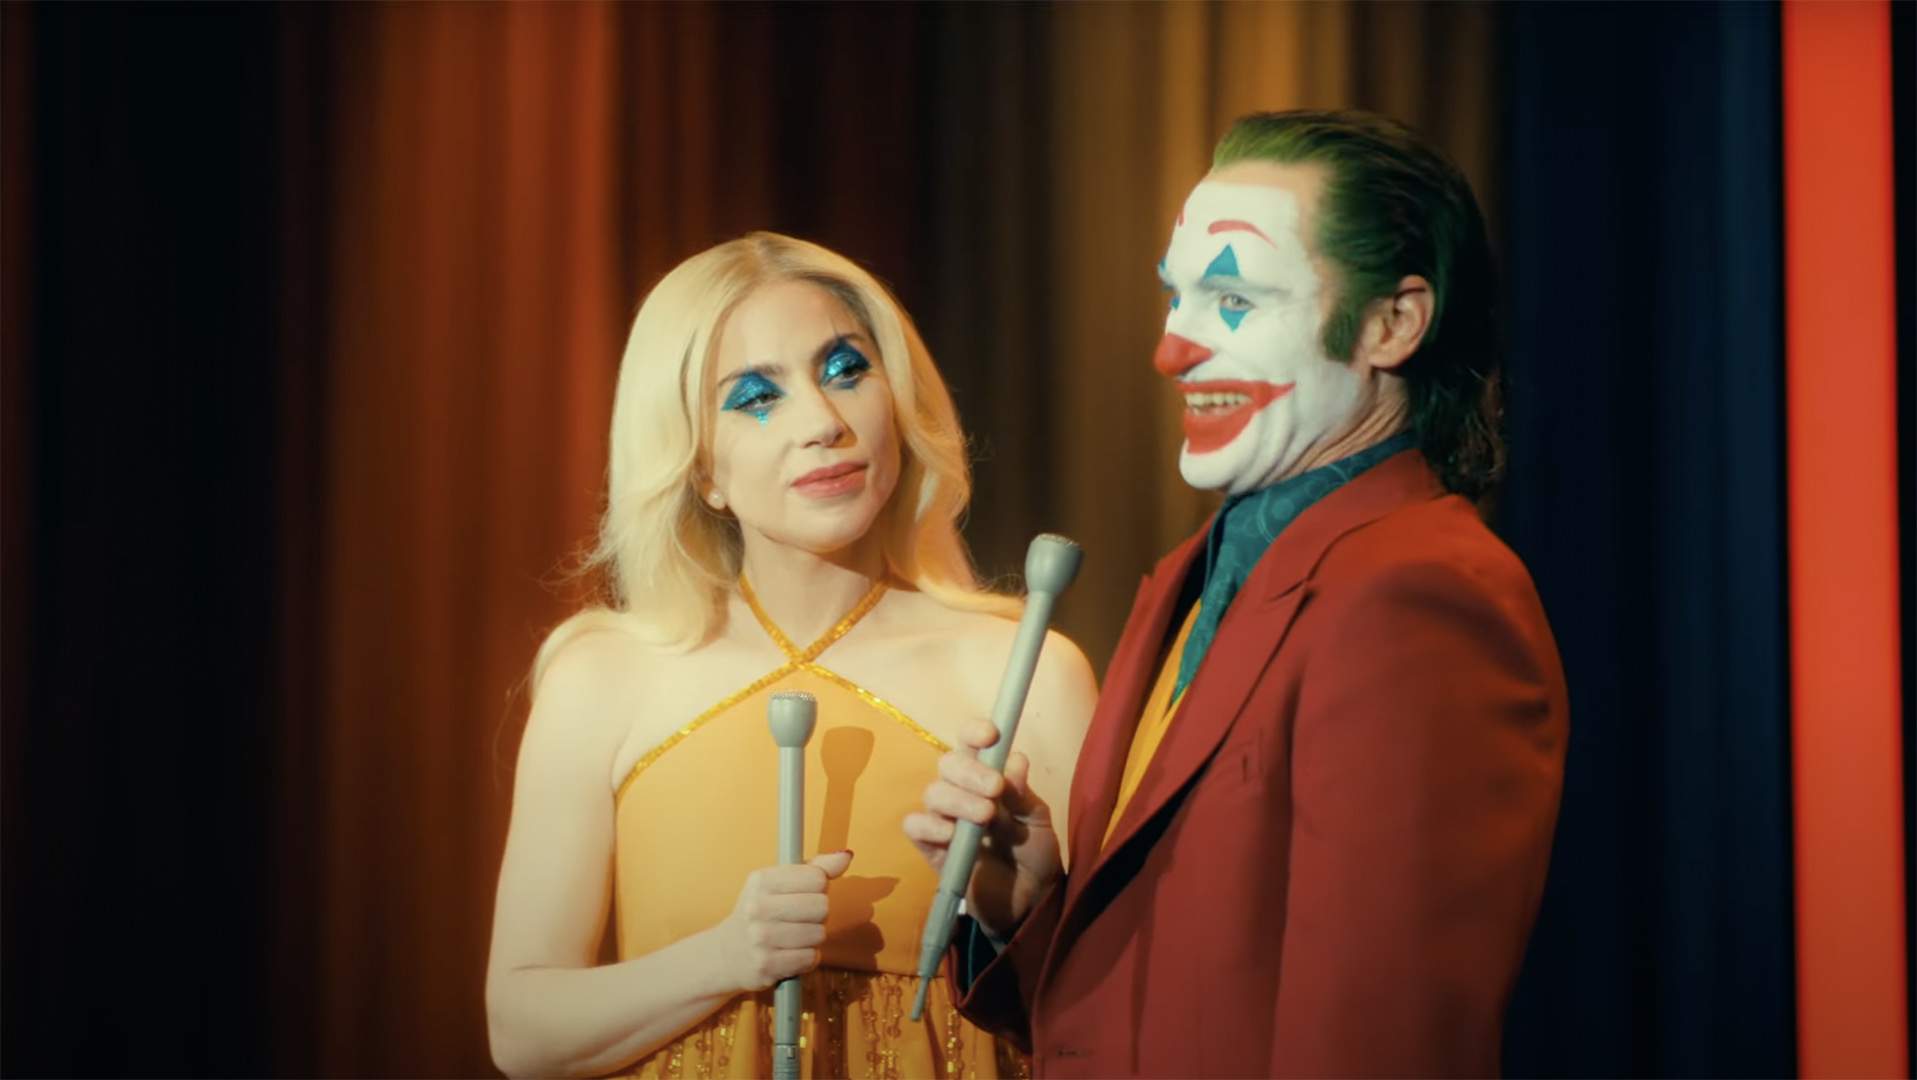 Joaquin Phoenix and Lady Gaga Sing, Dance and Cause Chaos in the Full 'Joker: Folie à Deux' Trailer